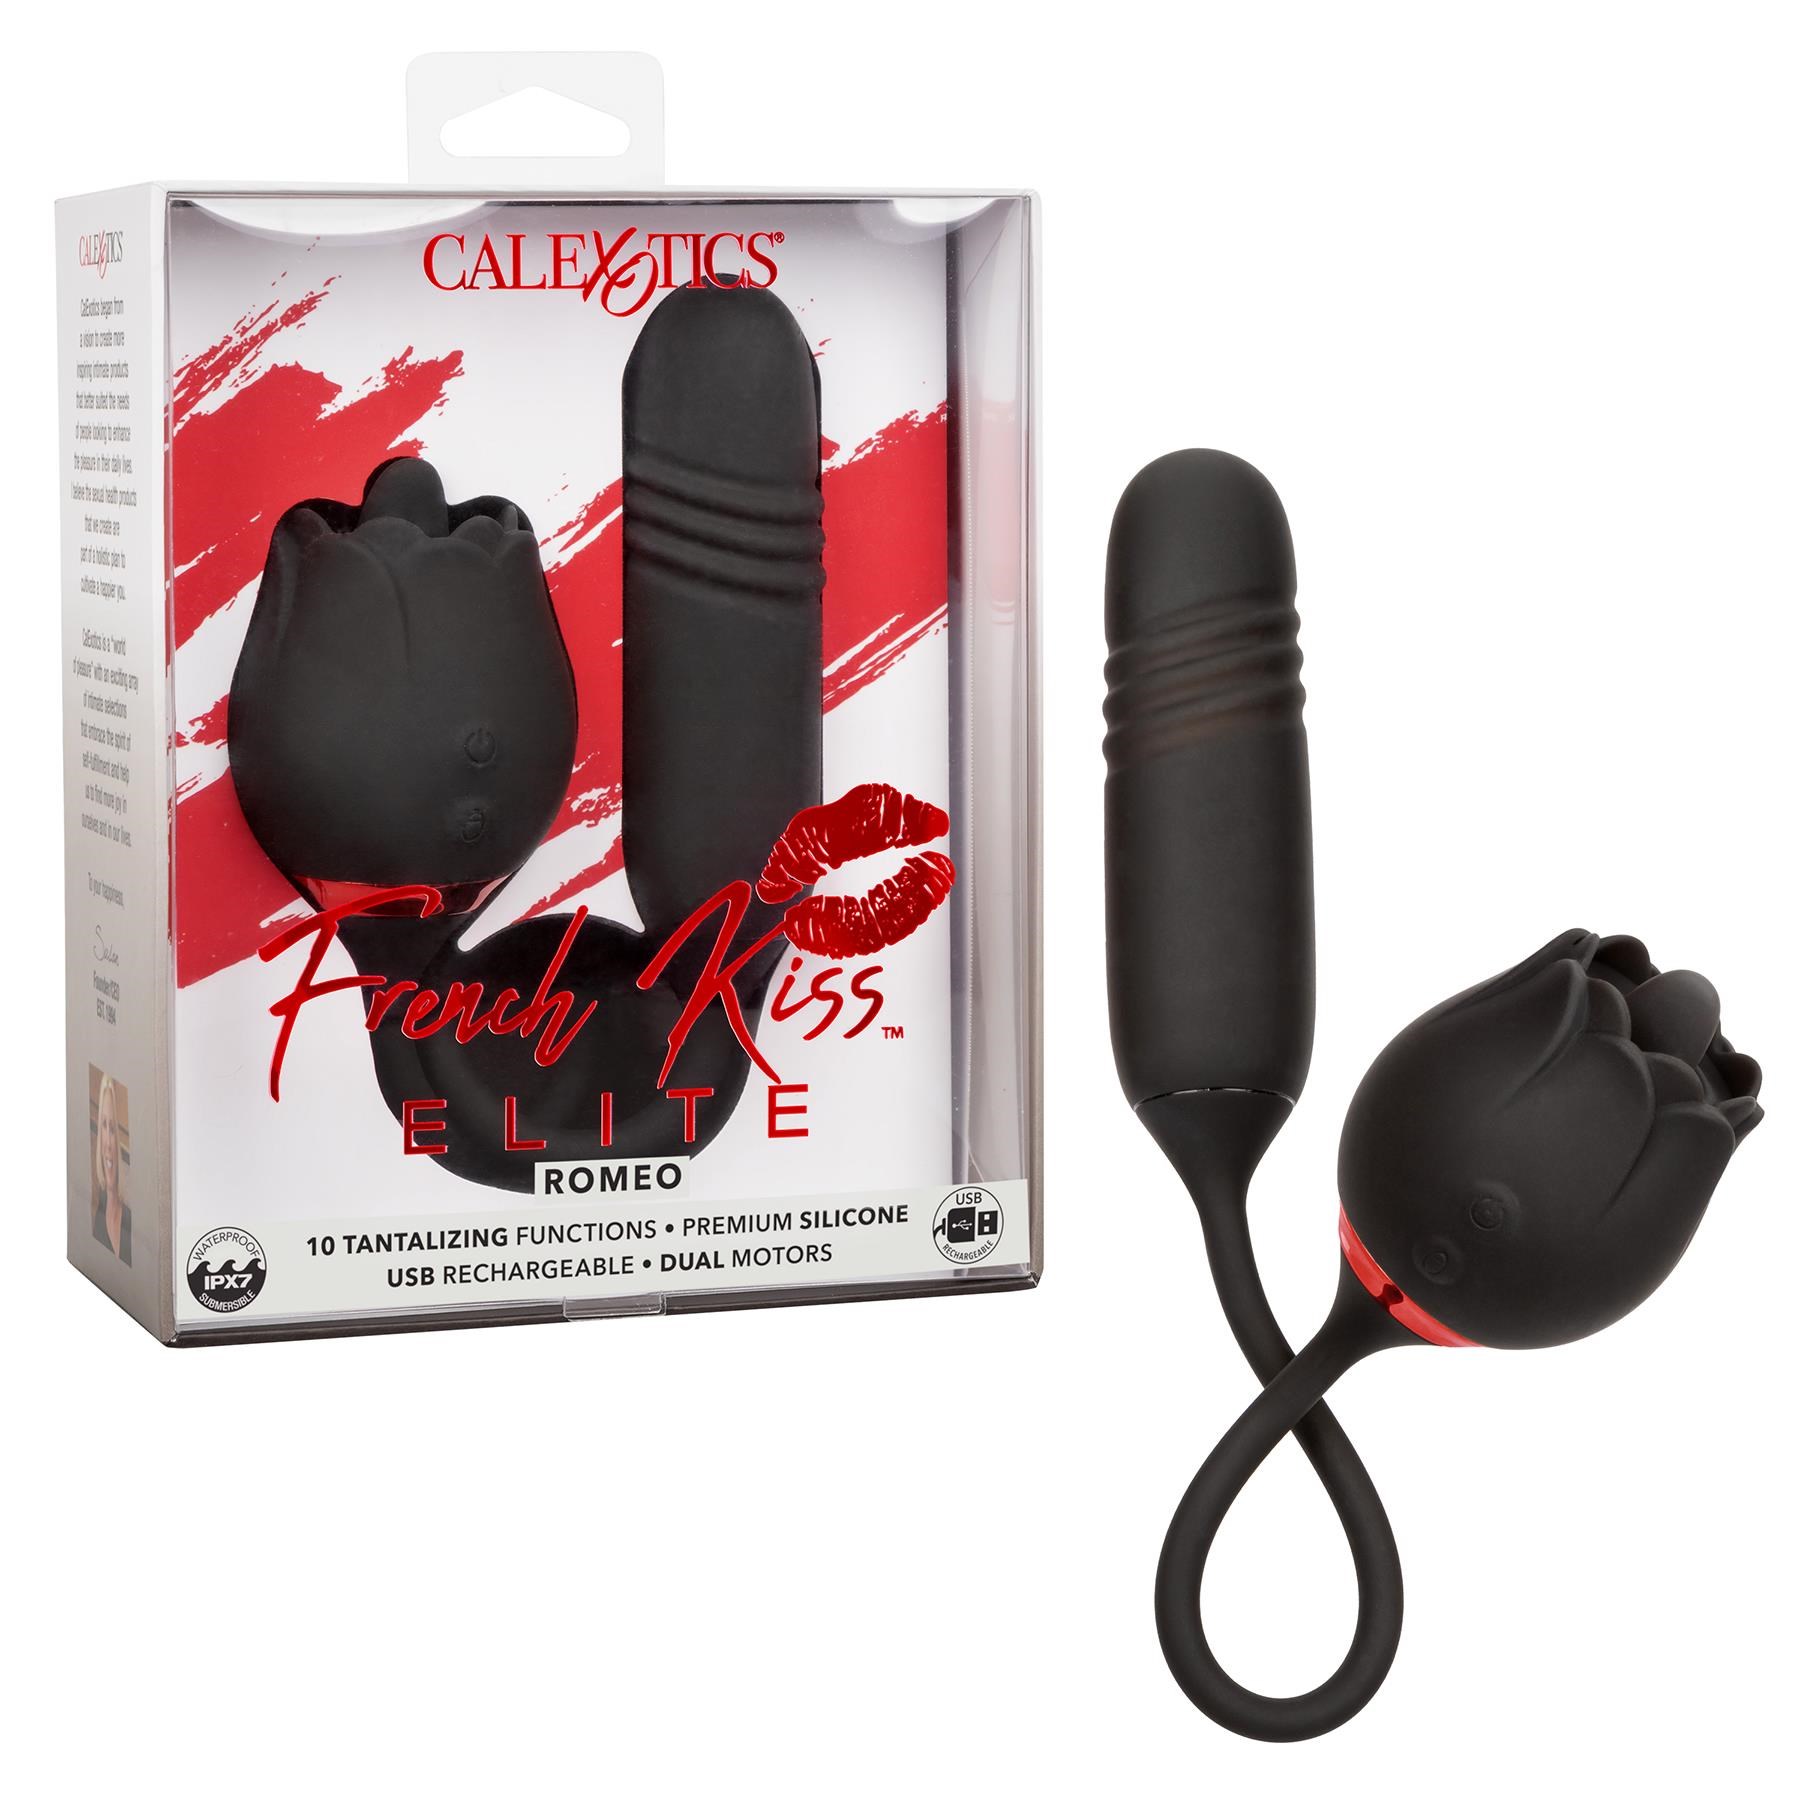 French Kiss Elite Romeo Clitoral and Thrusting Anal Vibrator - Product and Packaging